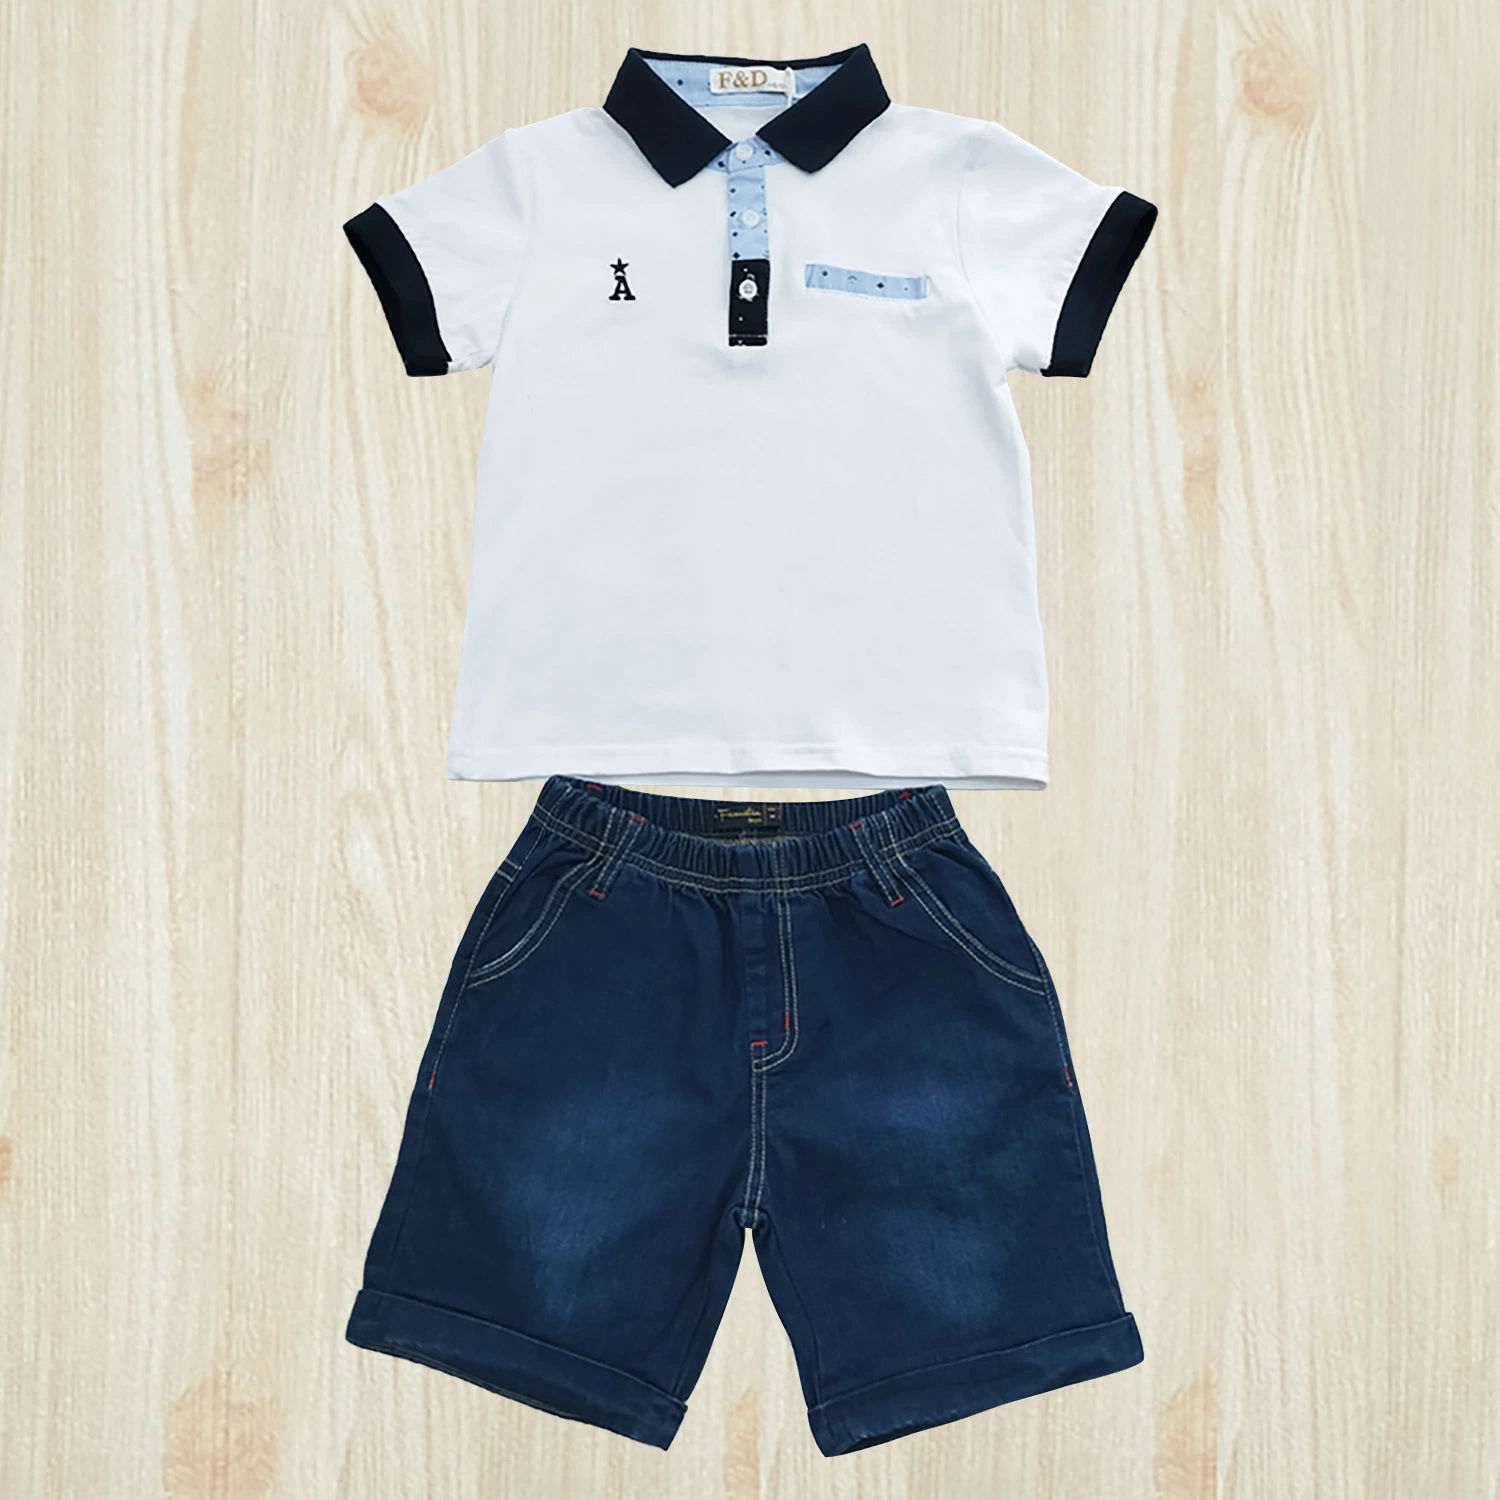 Summer Cotton Suit Short Sleeve Polo Shirt New in 2020 Children